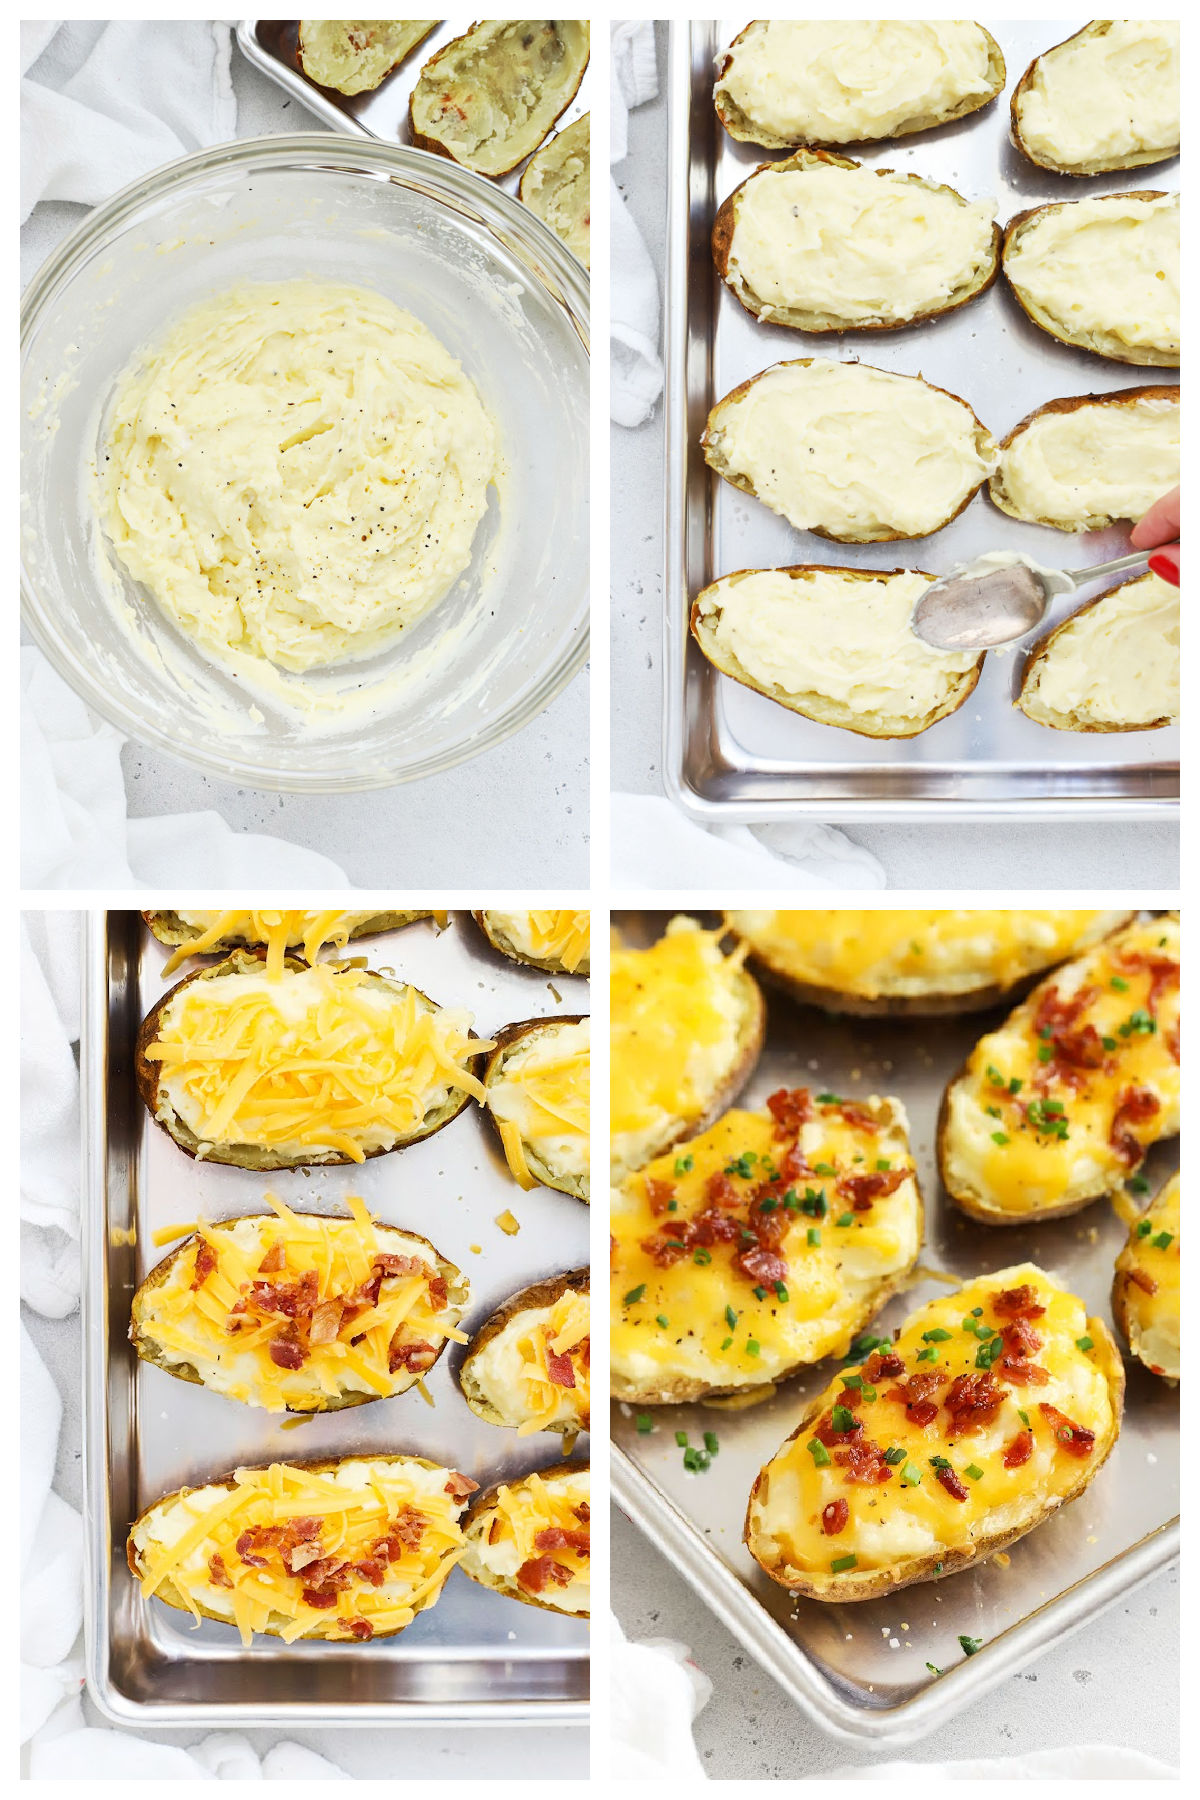 Making twice baked potatoes step by step